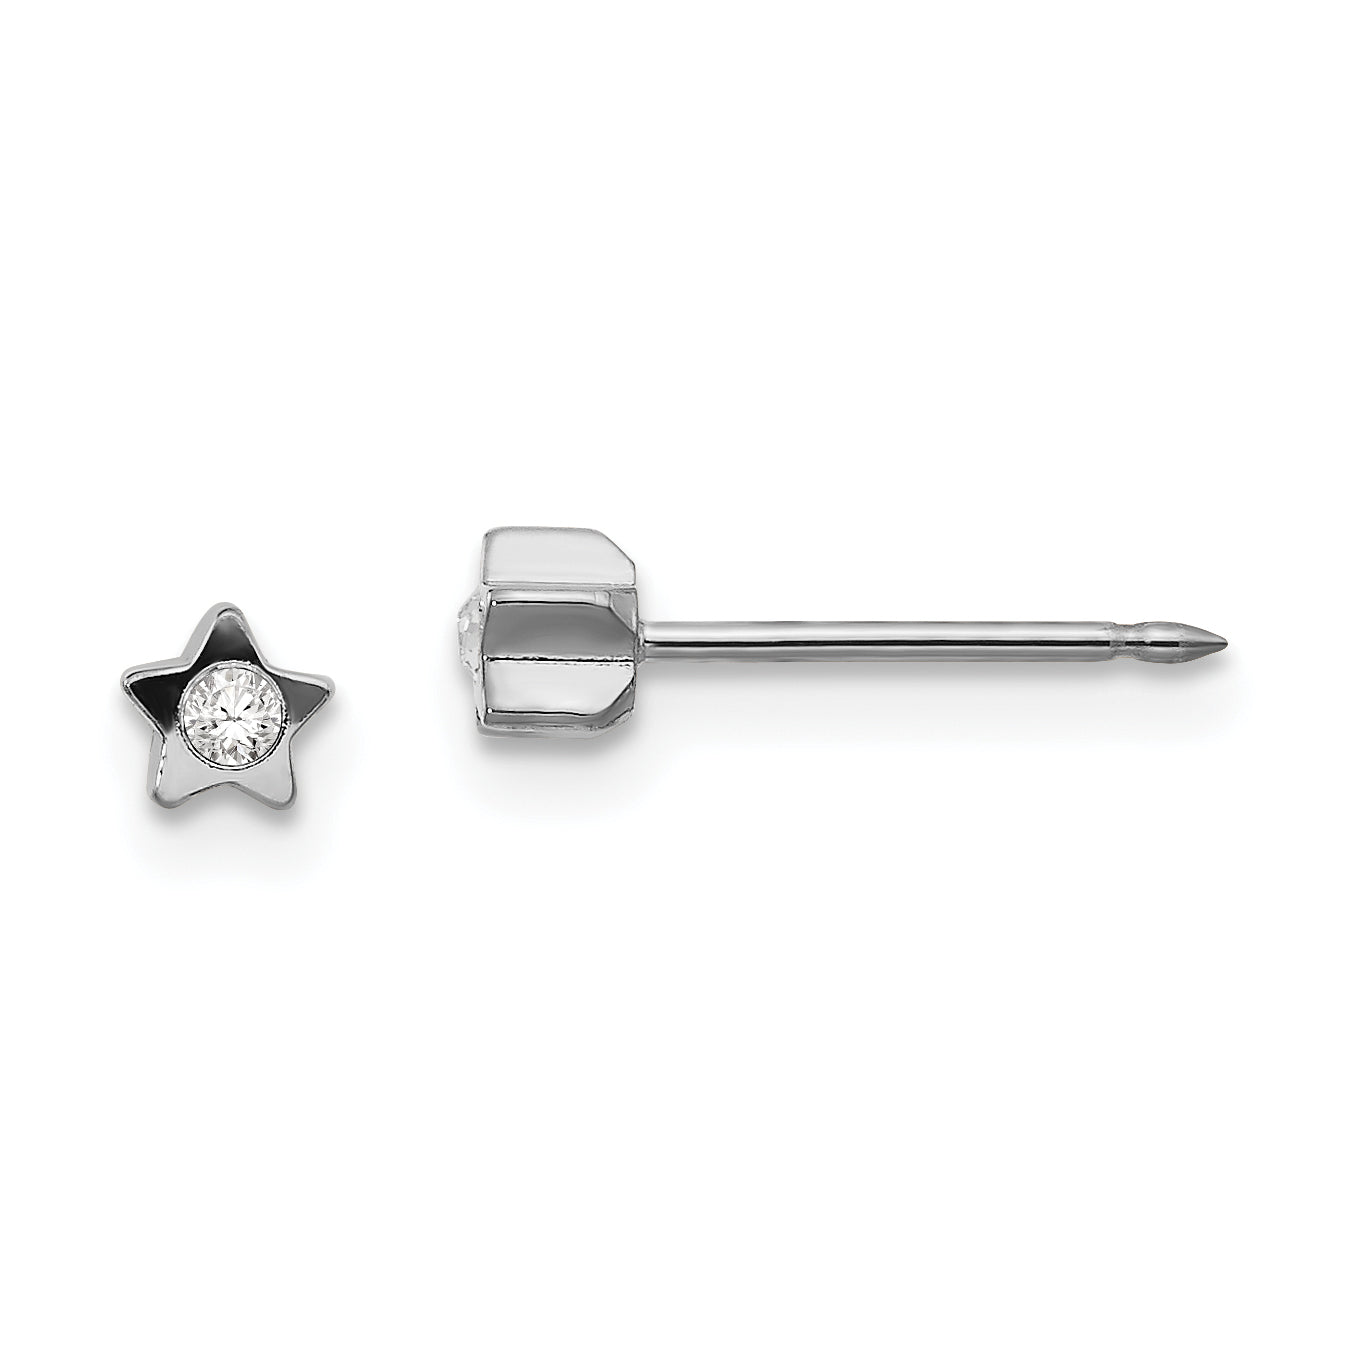 Inverness Stainless Steel Polished Crystal in Star Earrings